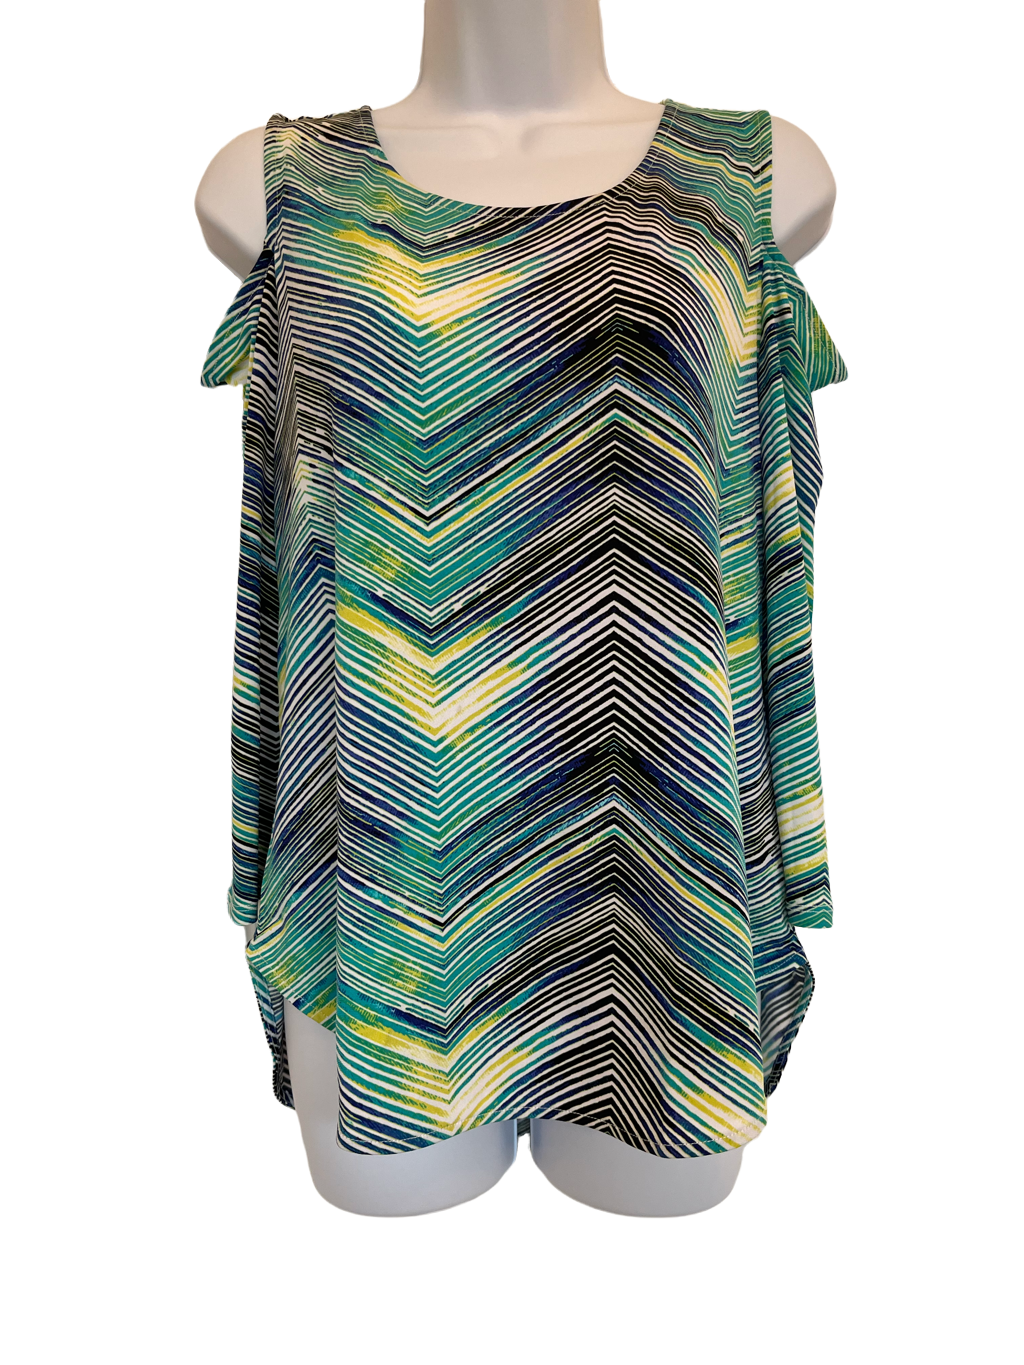 Primary image for Worthington Womens Small Green Yellow Graphic Chevron Print Cold Shoulder Top